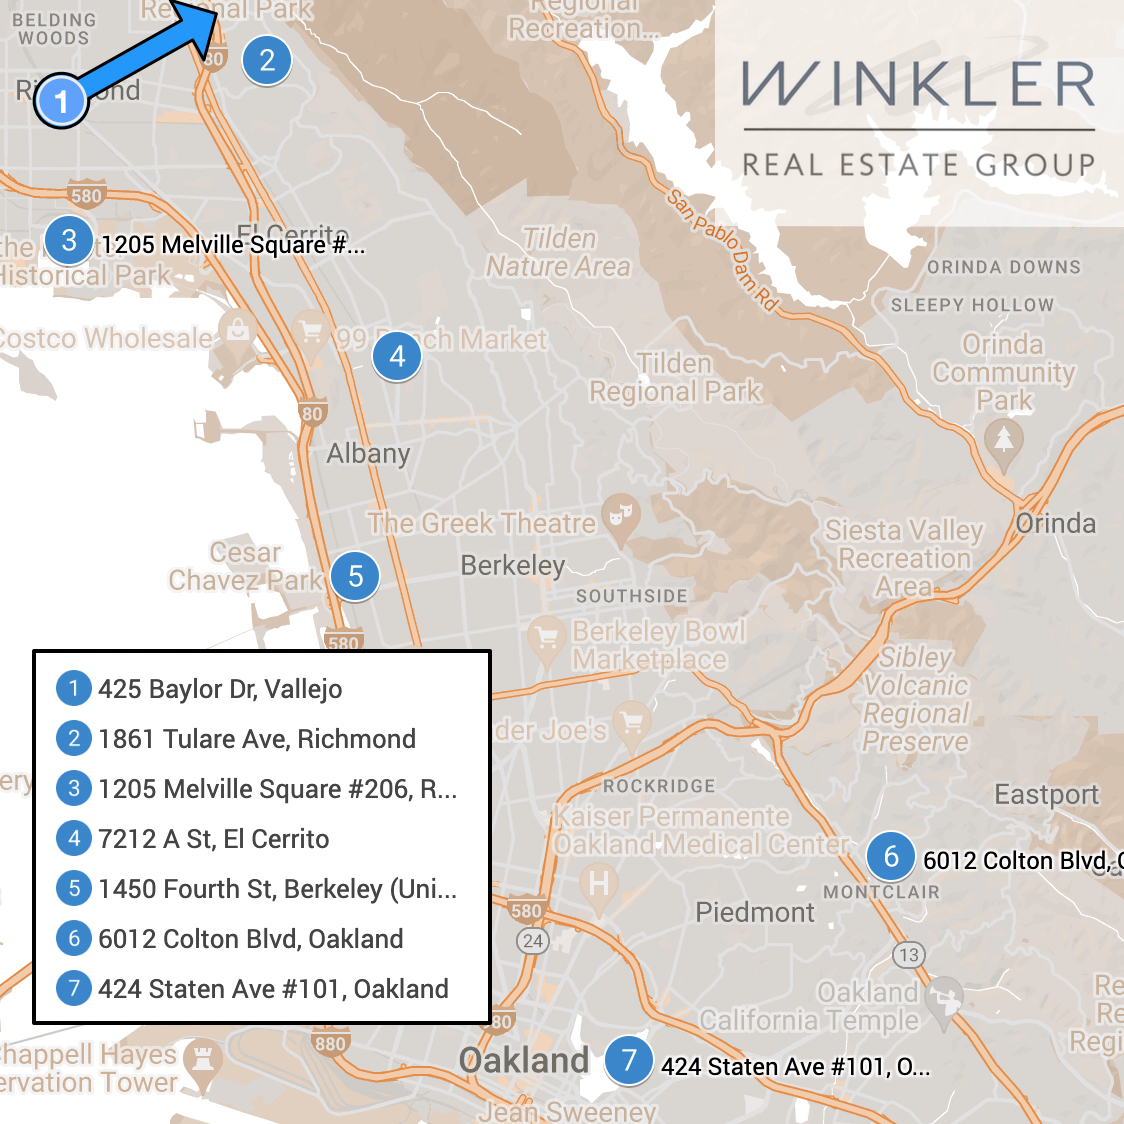 🚨 Open House Weekend w/ Winkler REG!

🗺️ Visit our map for details: ow.ly/F4eX50RfEuQ

#California #RealEstate #OpenHouse #RealEstateForSale #RealEstateAgency #CaliforniaRealEstate #SFBayArea #BayAreaRealEstate #RealEstateInvestments